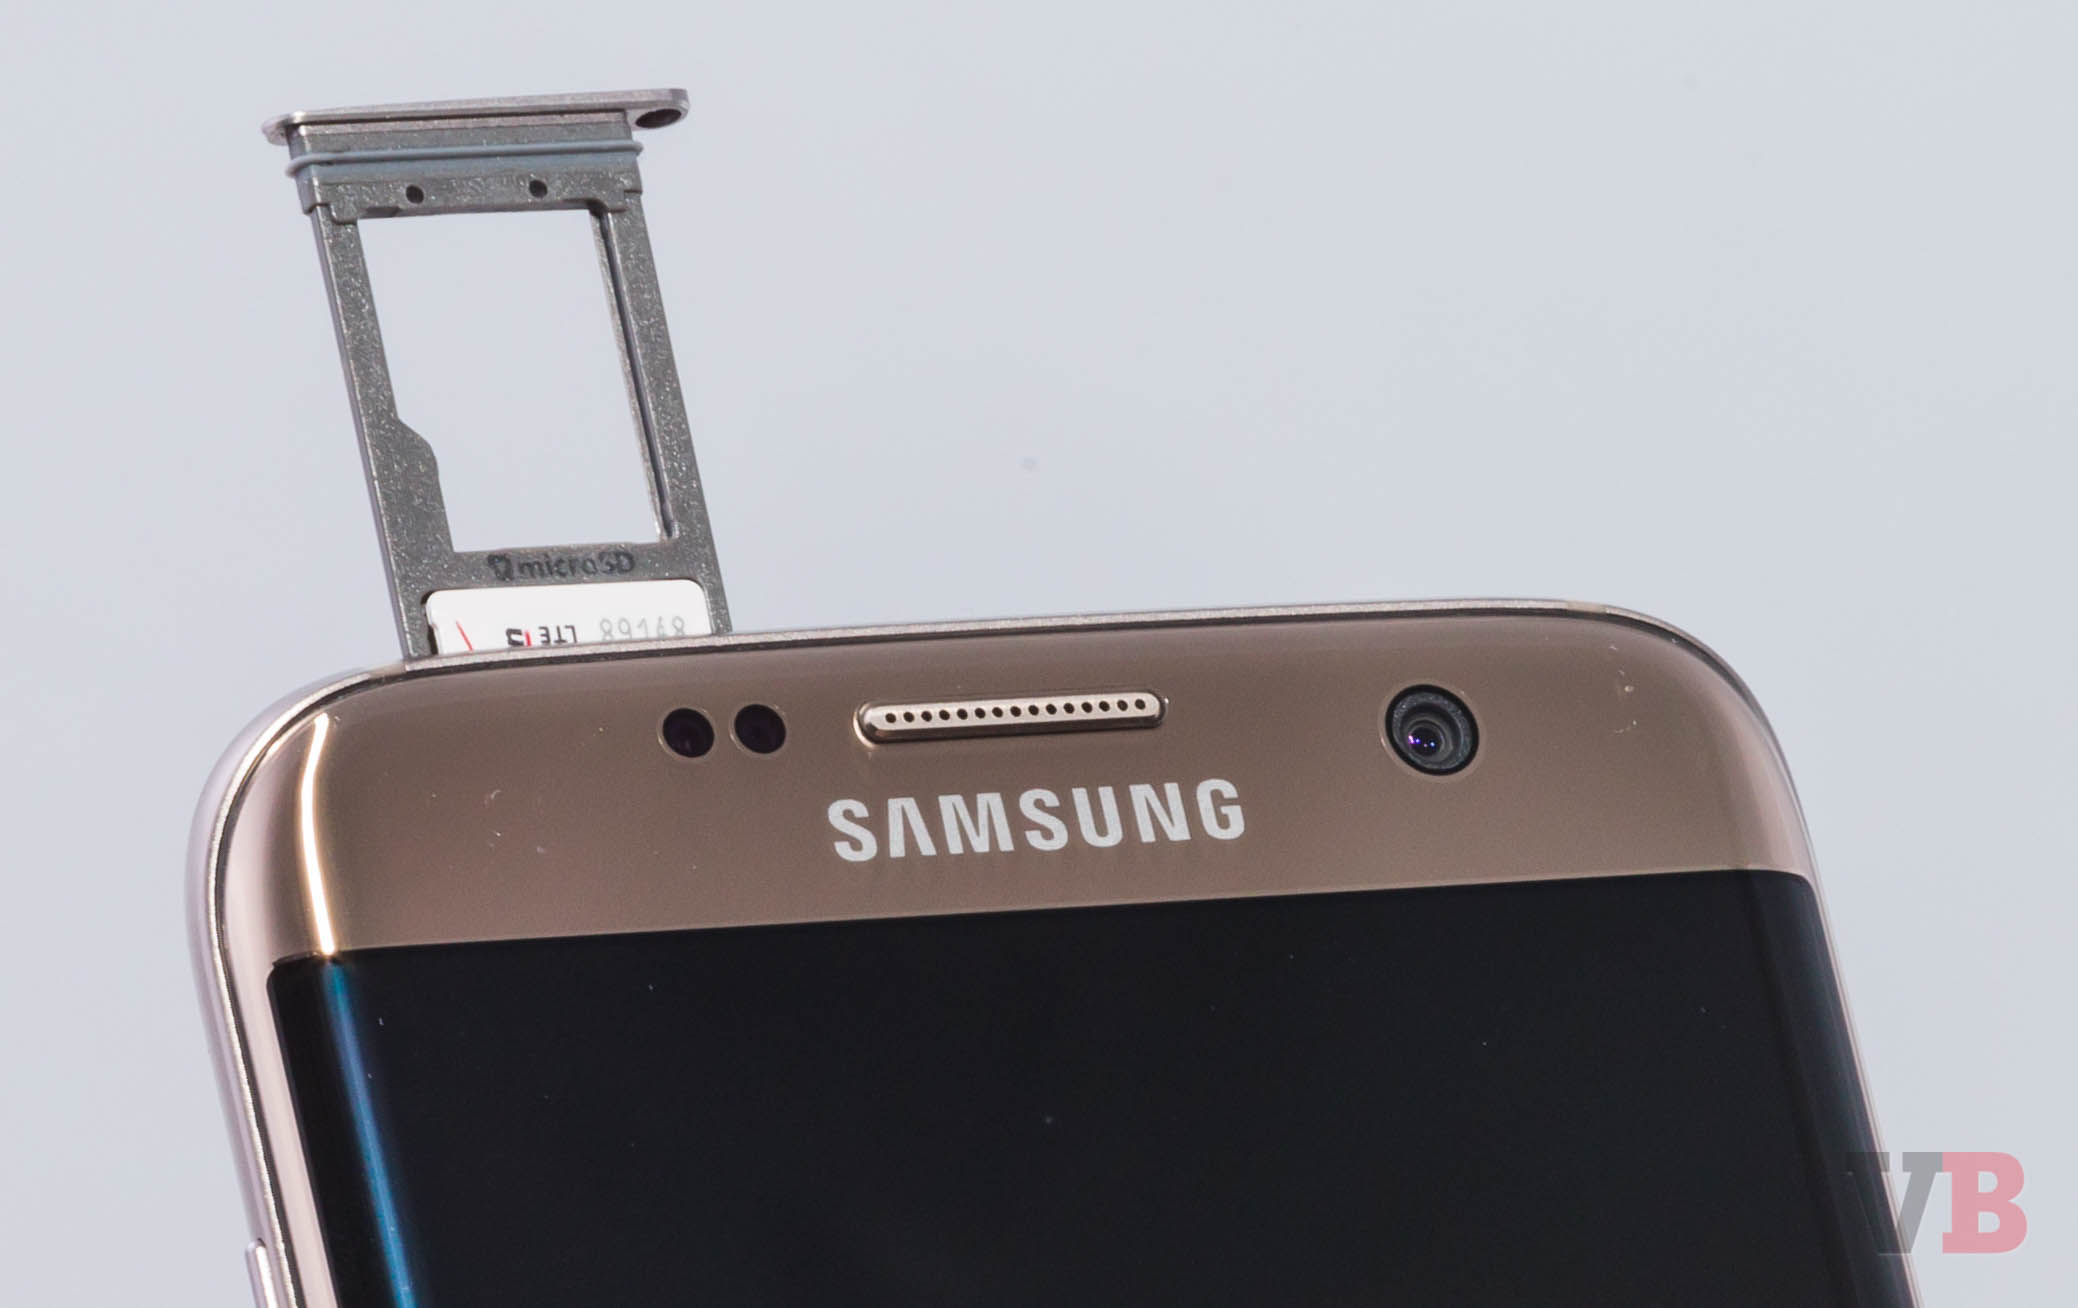 The dual-SIM card slot that's been added to the Samsung Galaxy S7 and S7 edge.